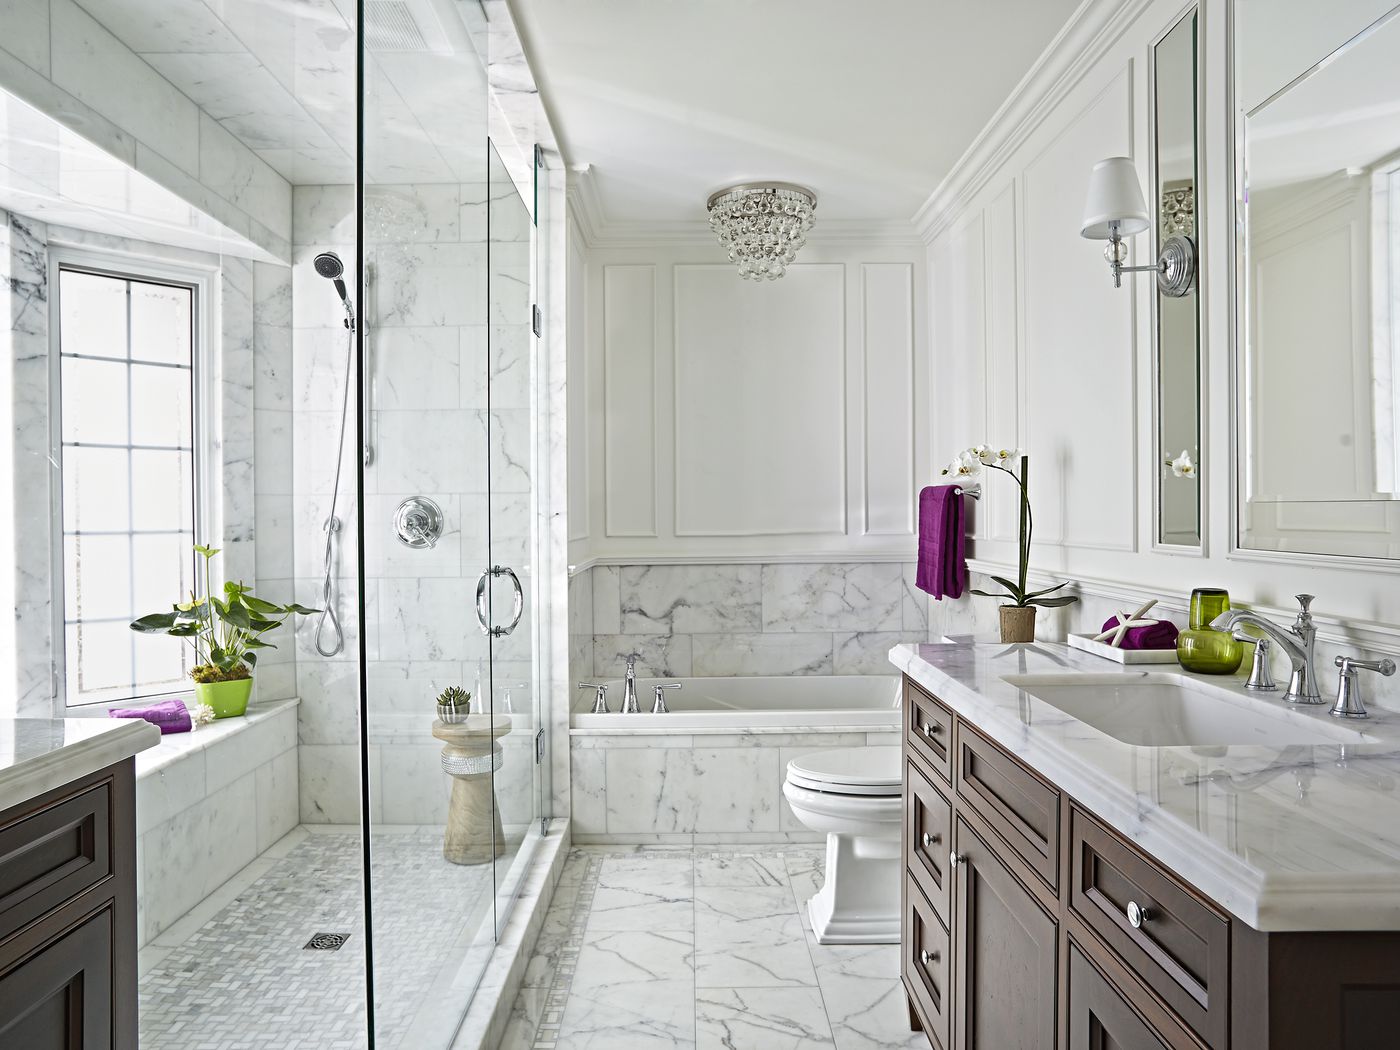 Redoing Your Bathroom? Read This! - This Old House